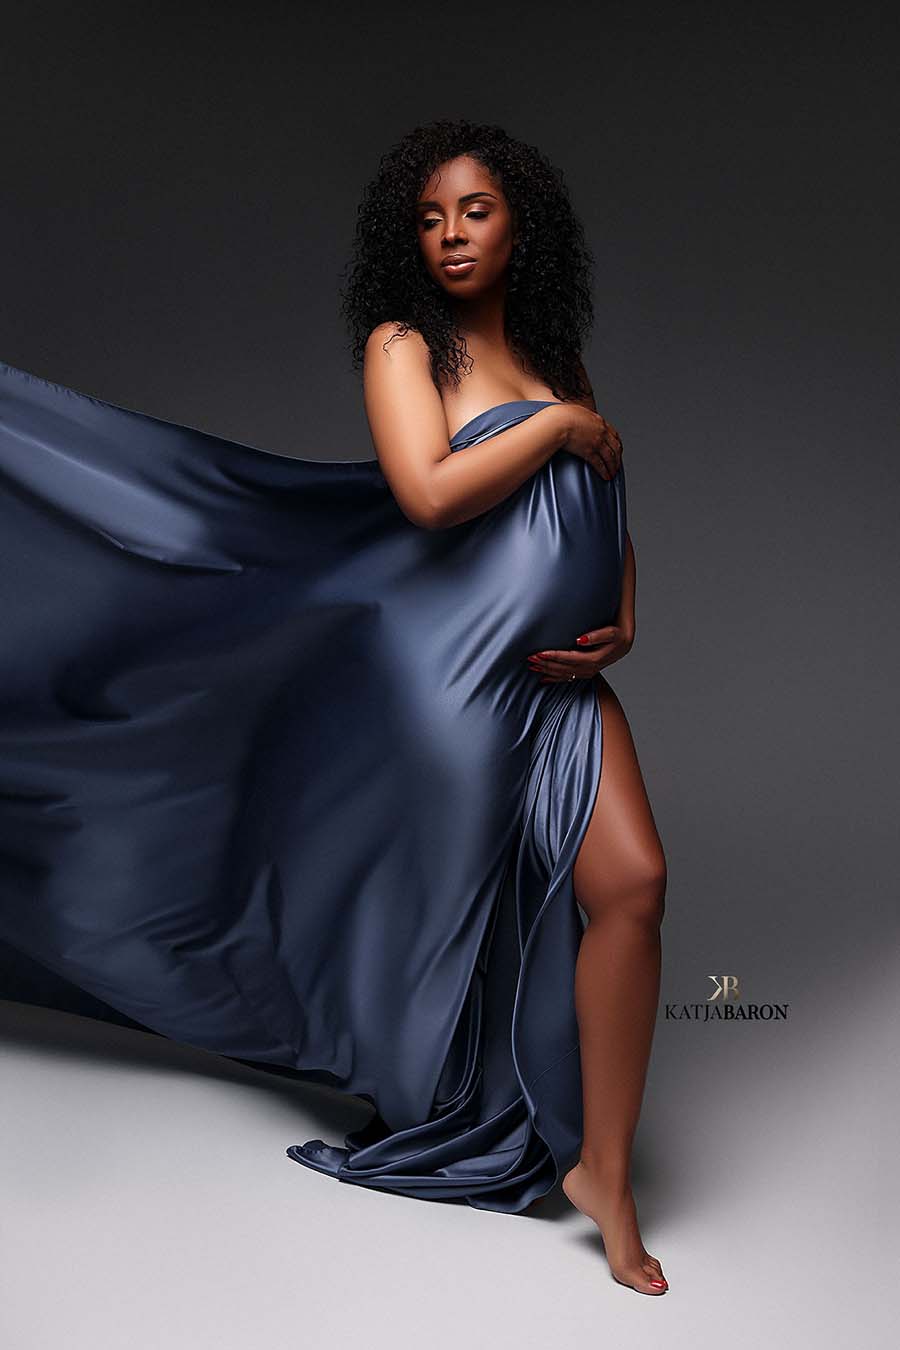 pregnant model with curly hair poses in a studio wearing a piece of draping fabric in denim color covering her chest and belly. one of her legs can be seen. she is looking to the side.